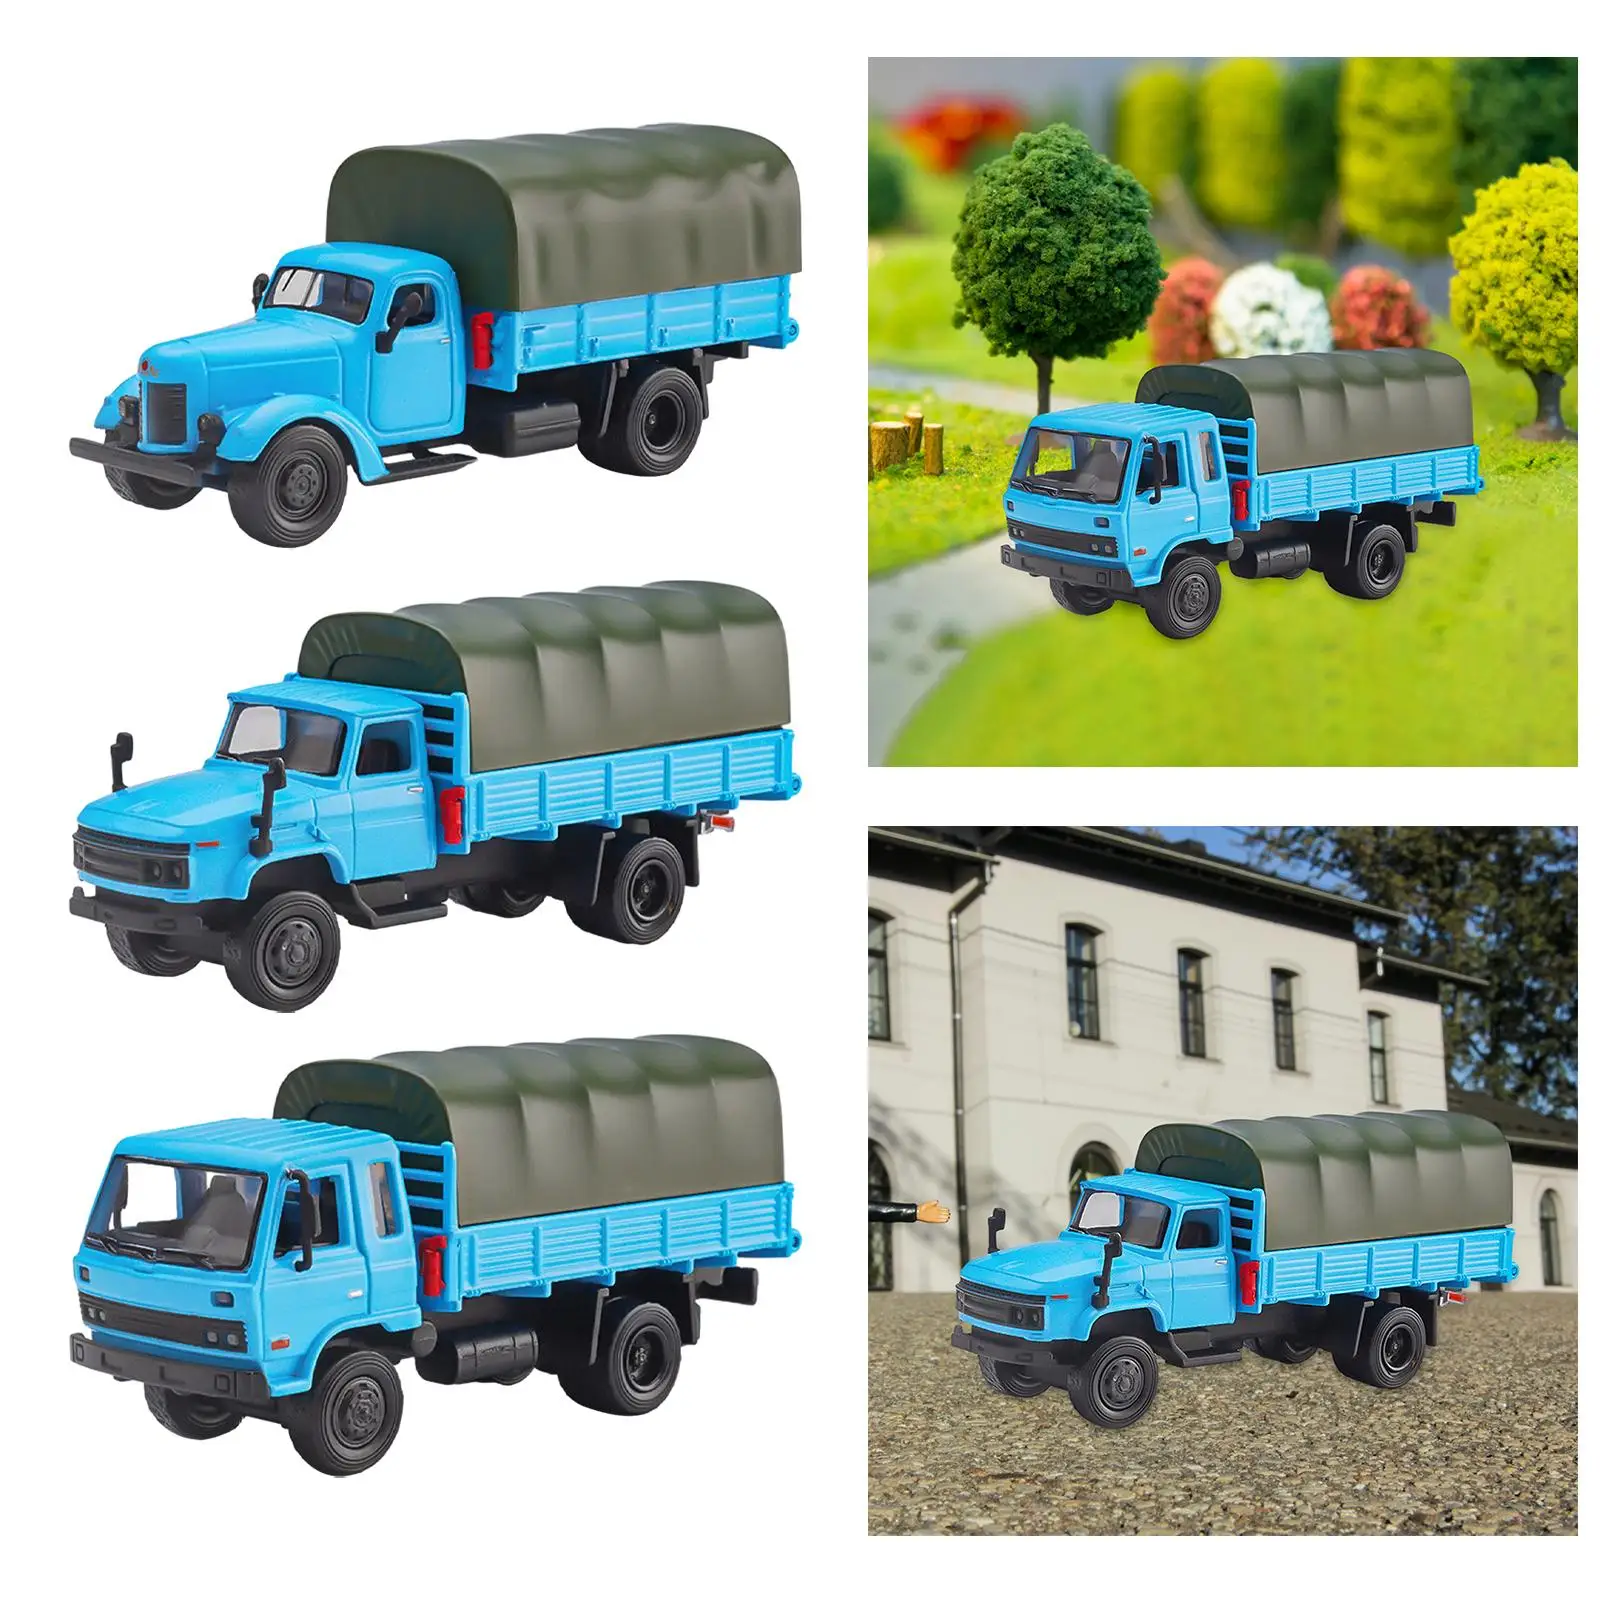 1:64 Transport Truck Mini Carrier Vehicle for Kids Adults Decoration